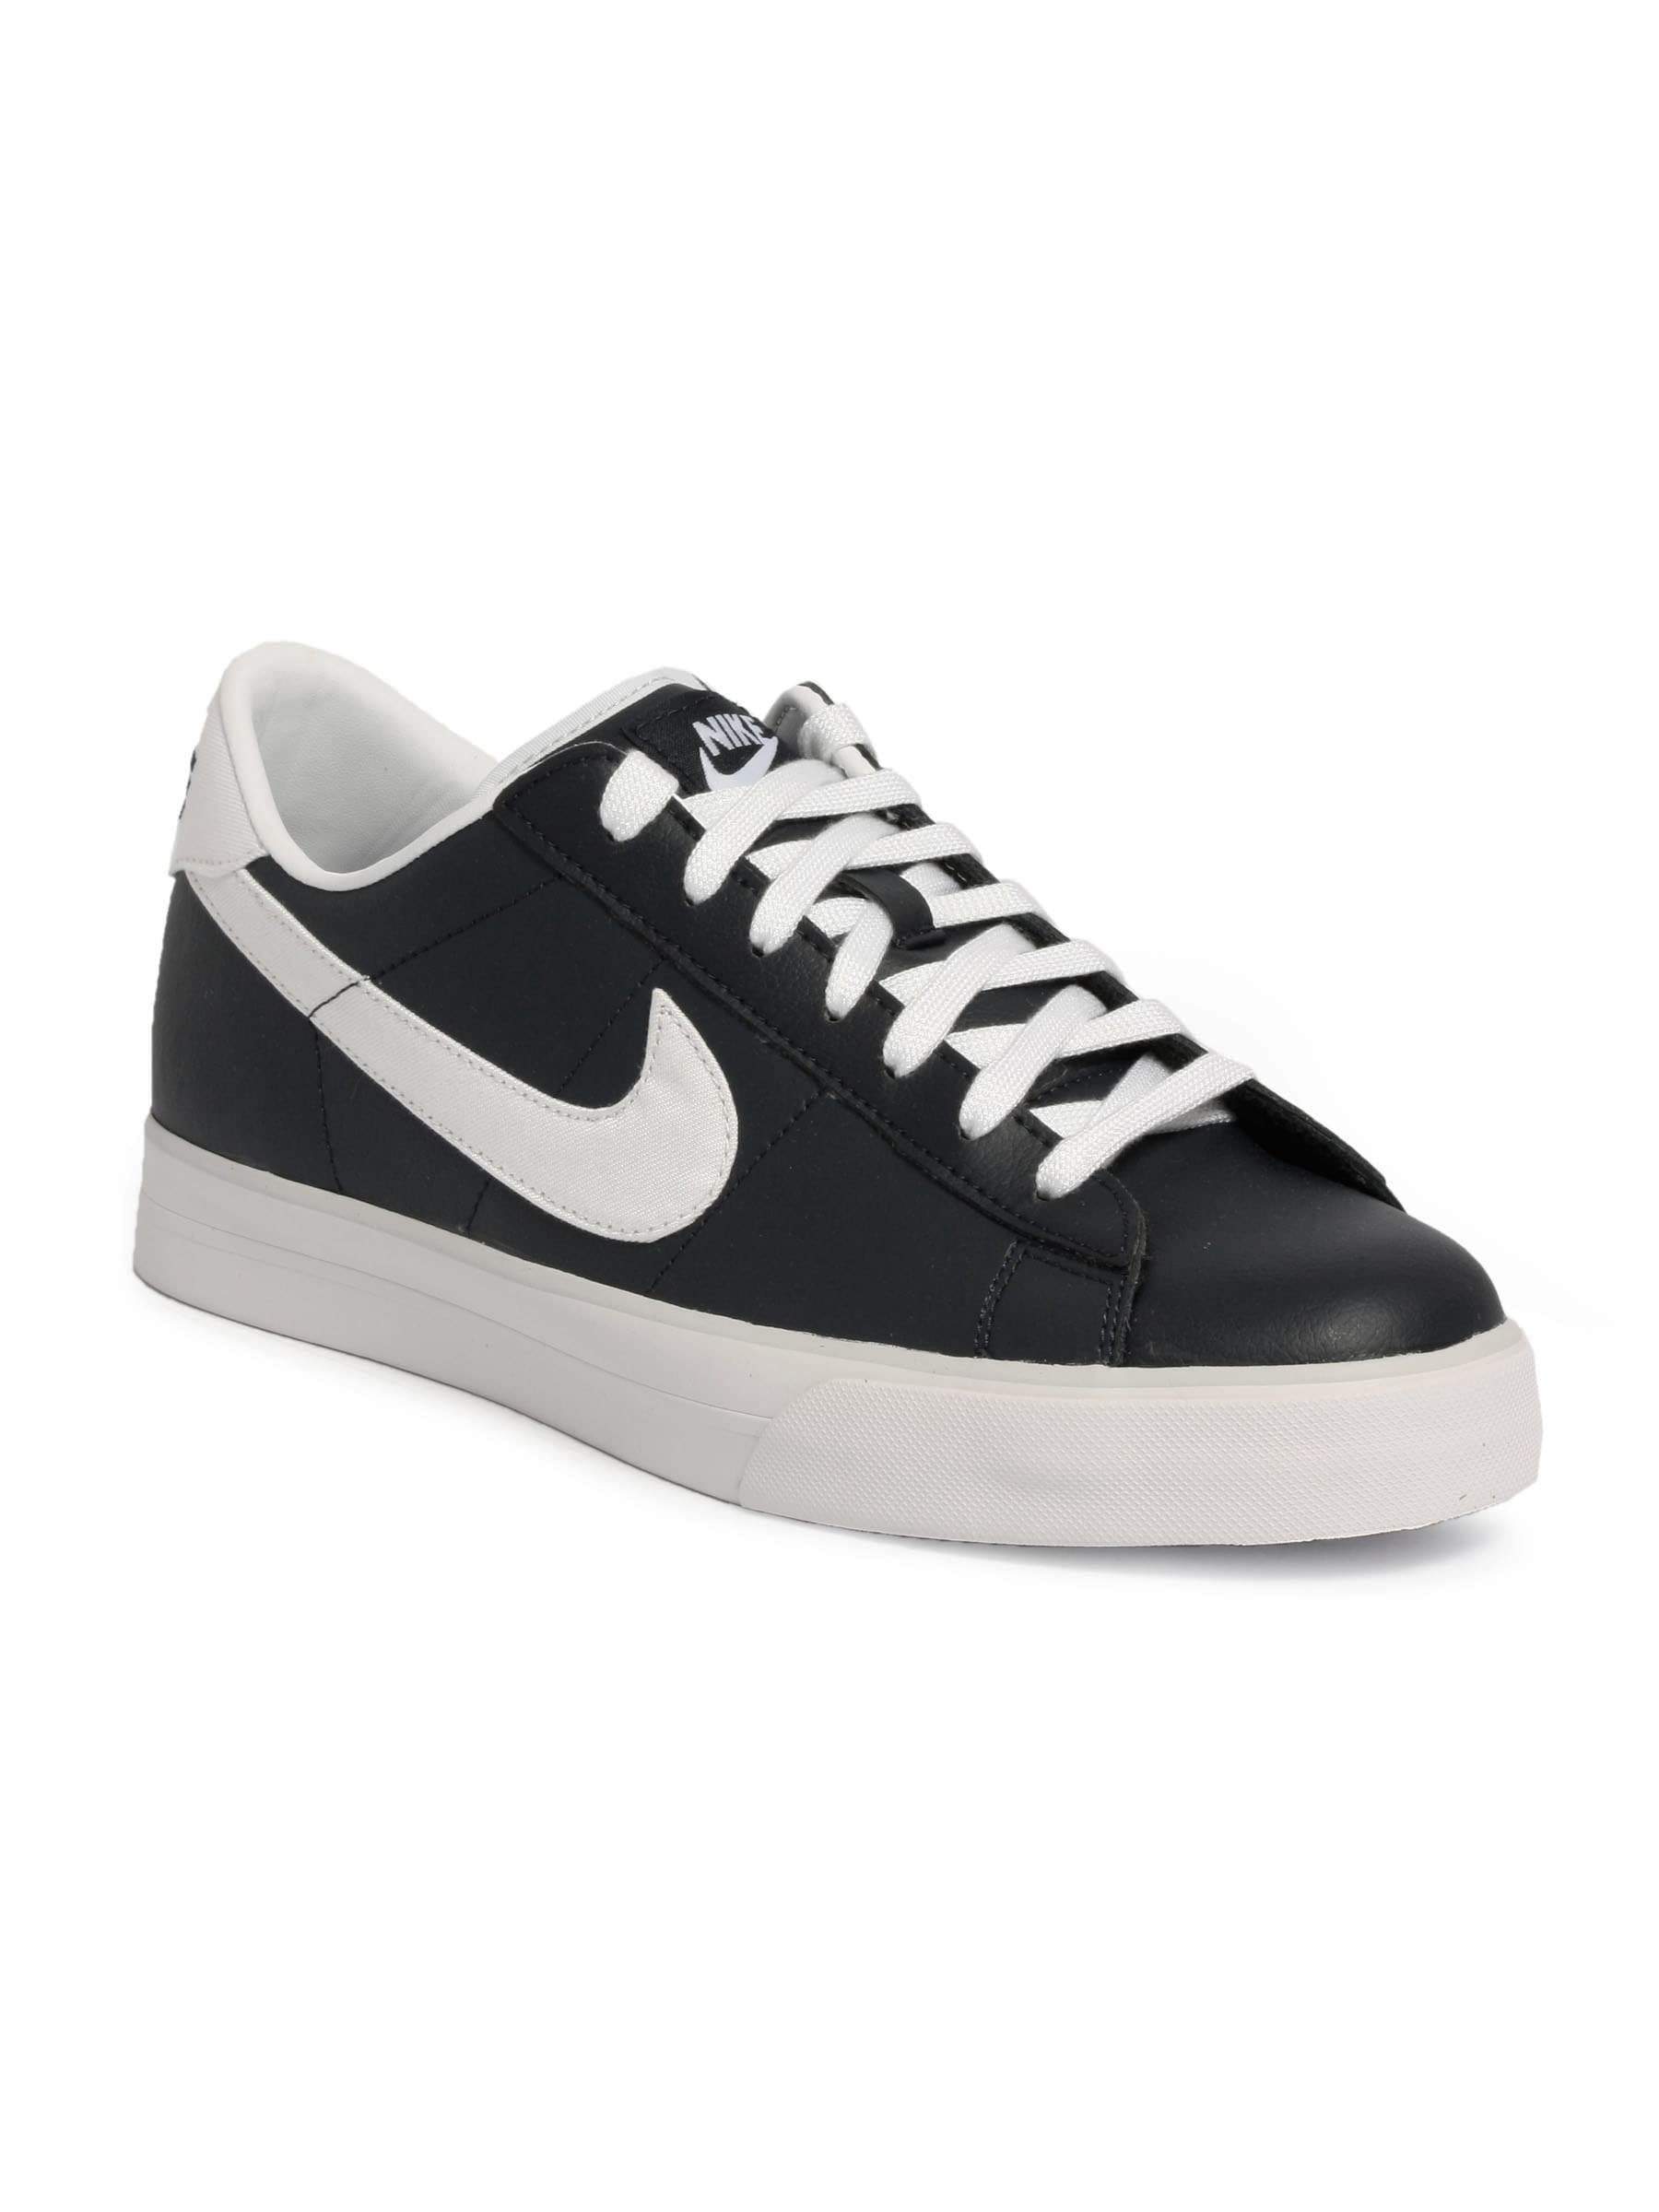 Nike Men Sweet Classic Leather Navy Blue Casual Shoes